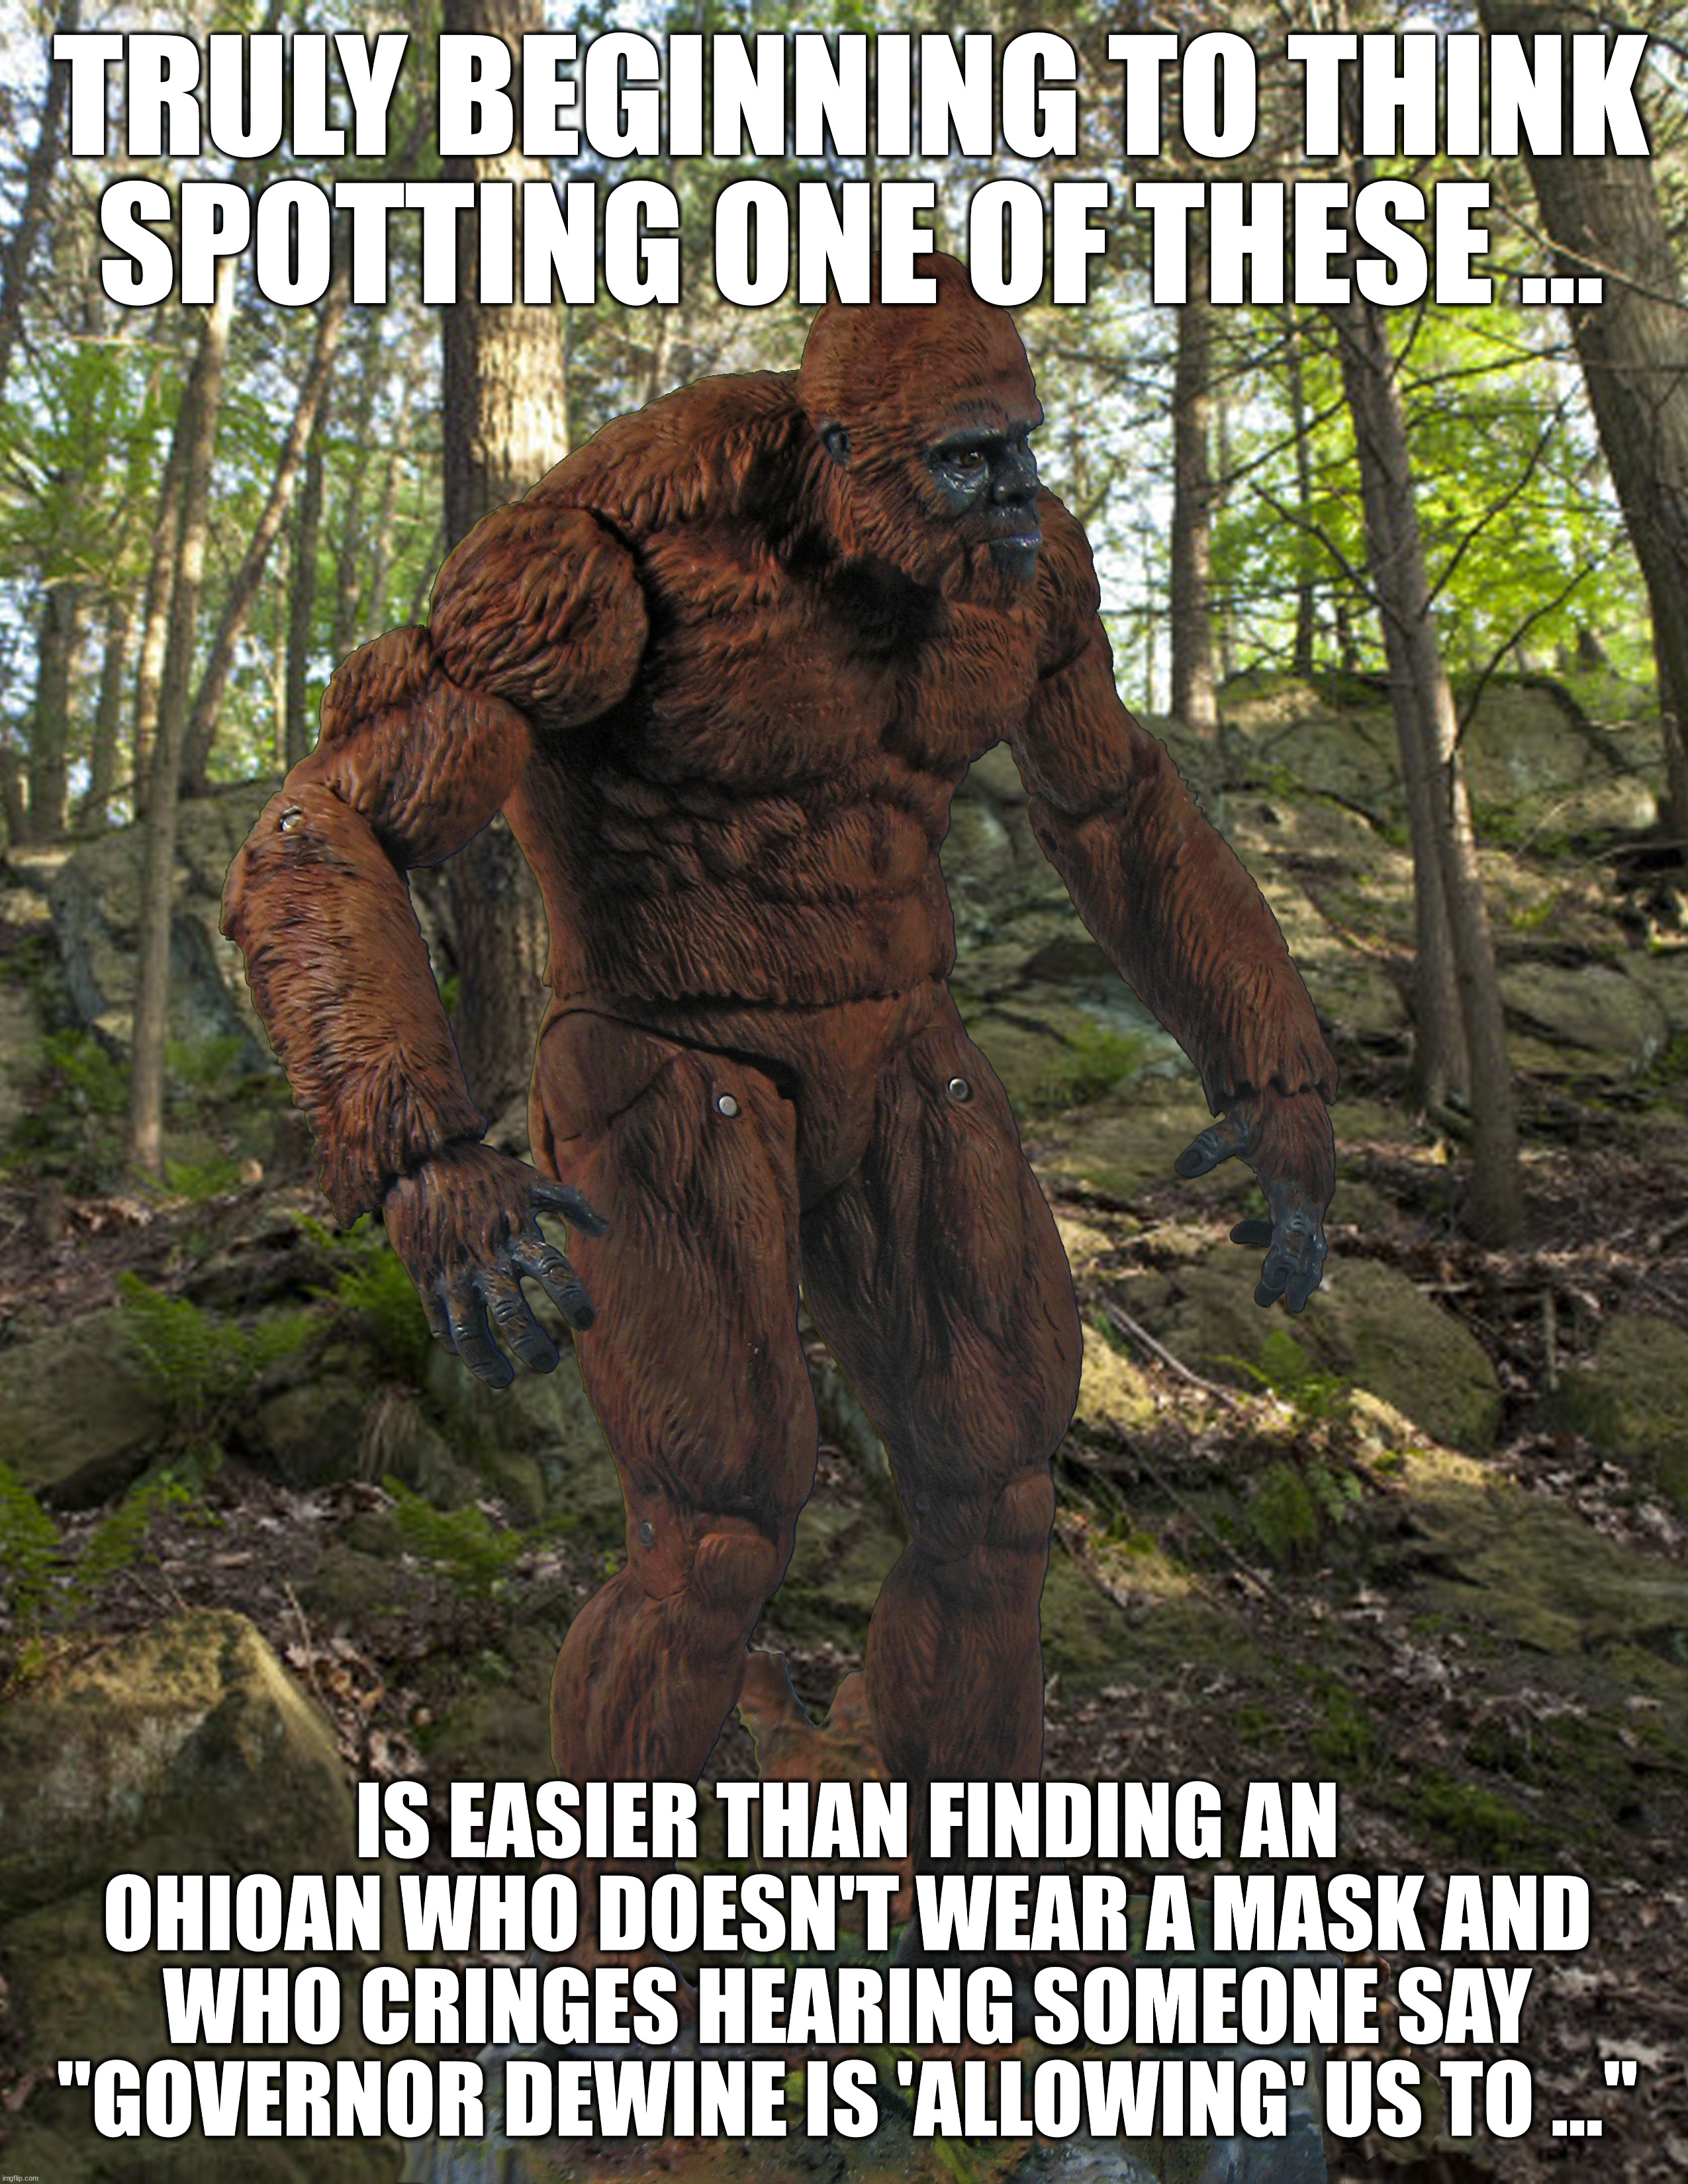 Spotting Sasquatch | TRULY BEGINNING TO THINK SPOTTING ONE OF THESE ... IS EASIER THAN FINDING AN OHIOAN WHO DOESN'T WEAR A MASK AND WHO CRINGES HEARING SOMEONE SAY "GOVERNOR DEWINE IS 'ALLOWING' US TO ..." | image tagged in sasquatch,masks,ohio,covidiots | made w/ Imgflip meme maker